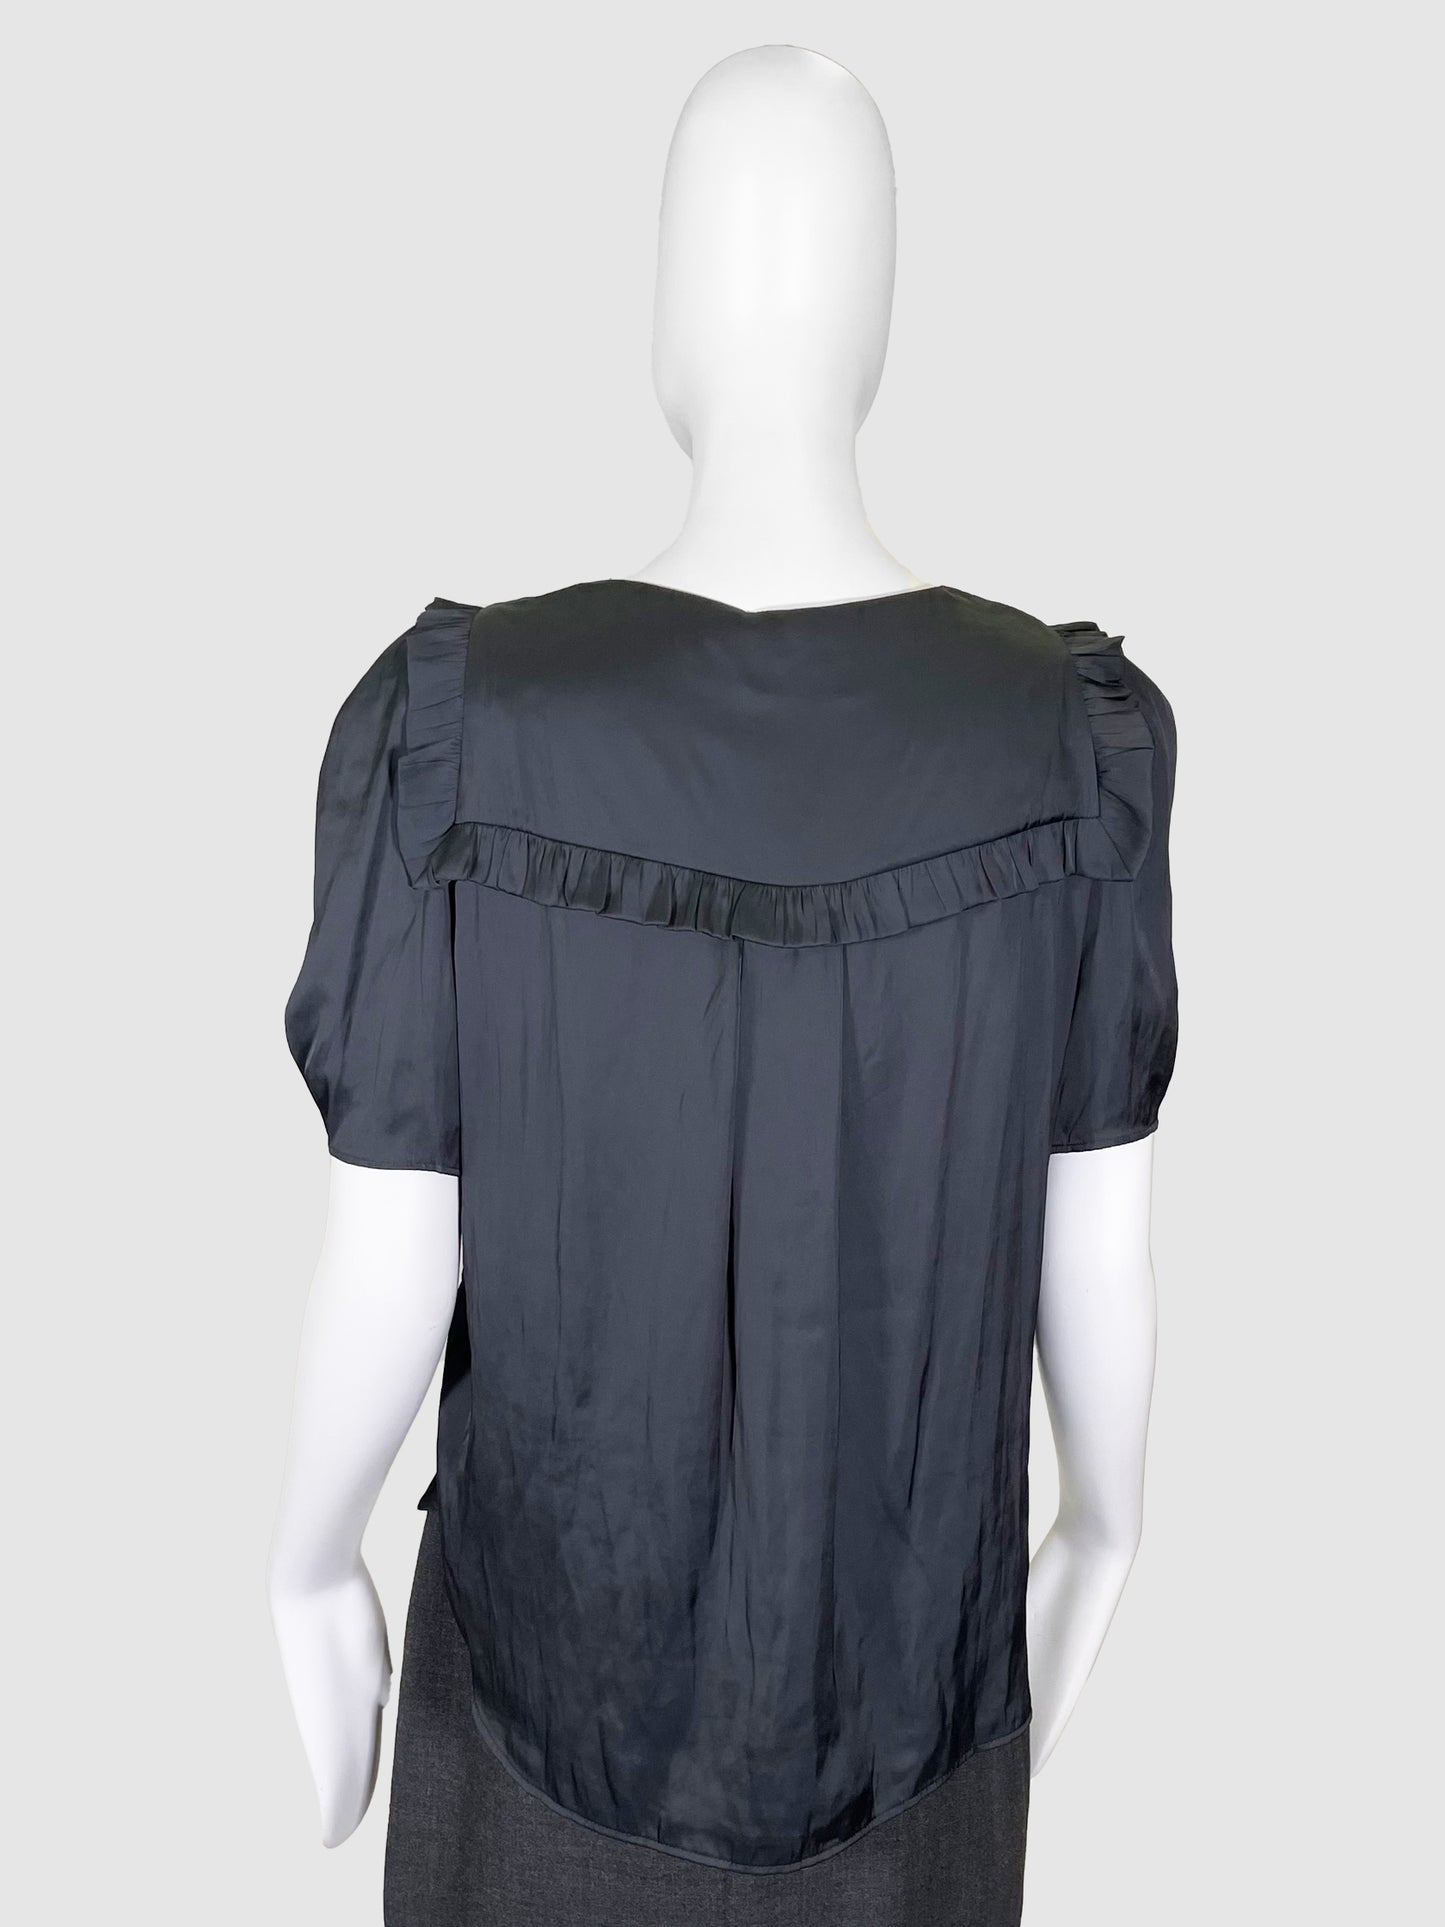 Zadig & Voltaire Satin Blouse with Ruffle Trim - Size S